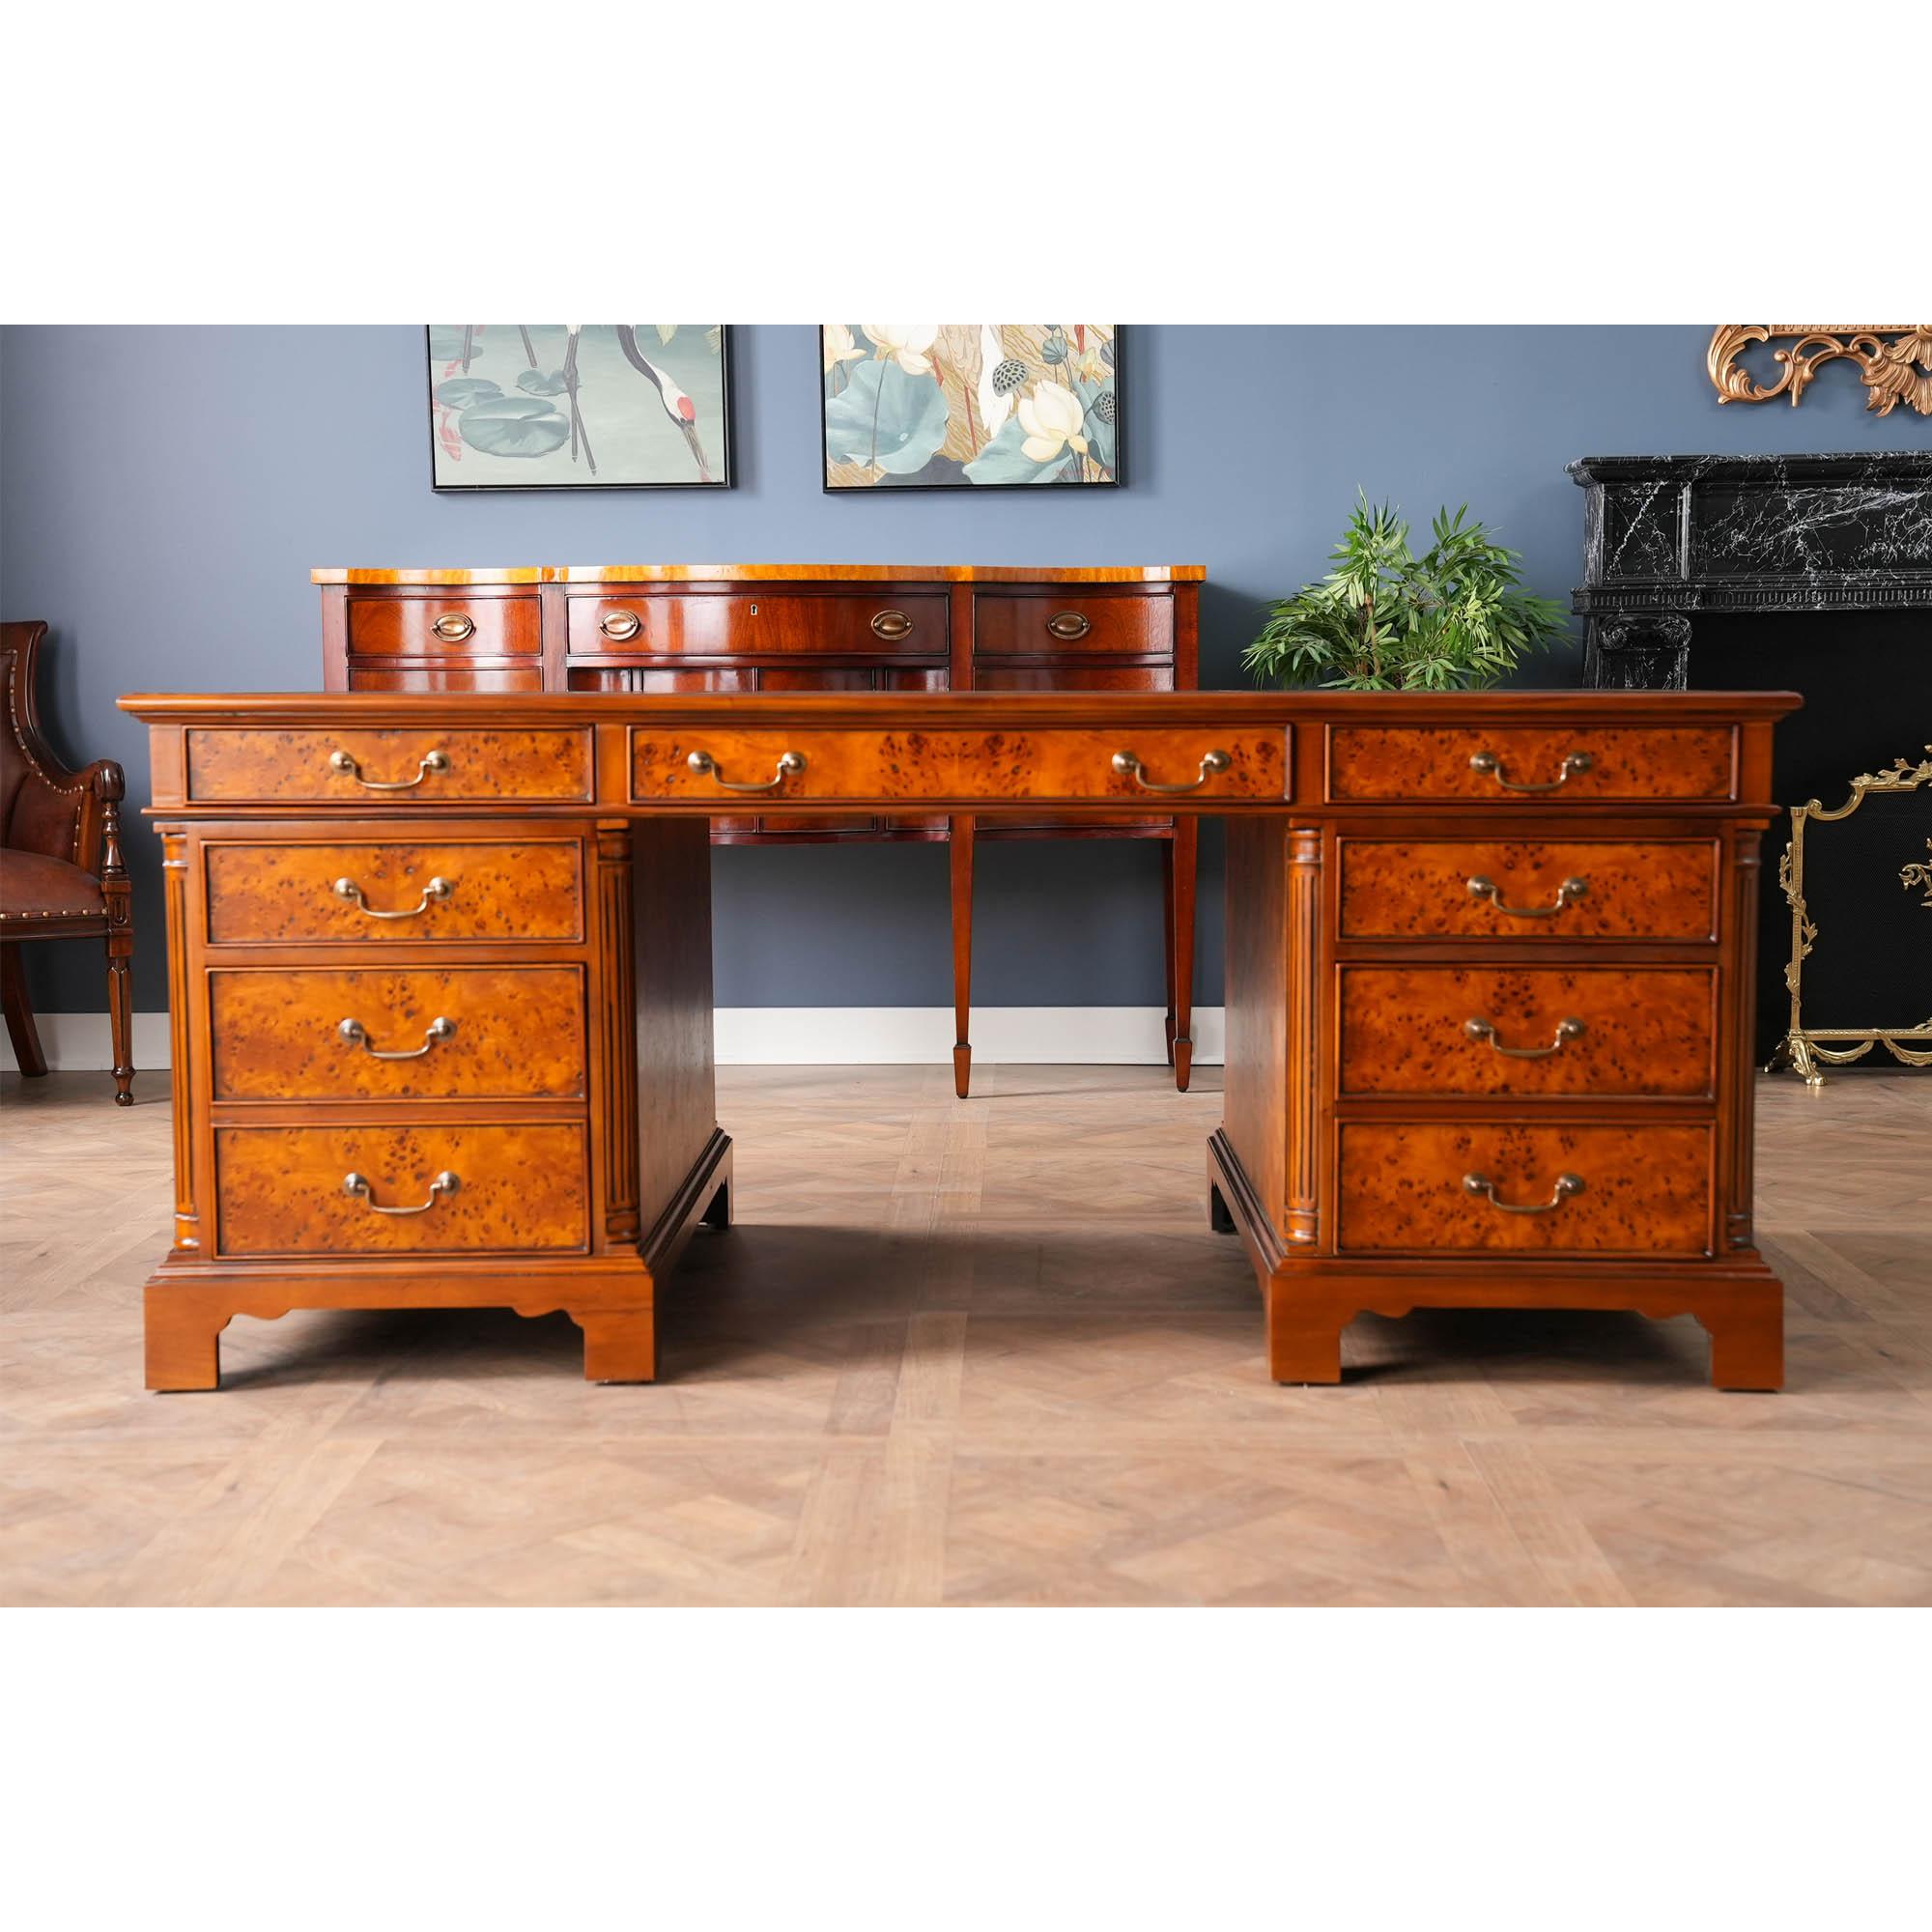 Equally suited for use either at the workplace or in a home office the Niagara Furniture Large Burled Executive Desk with tooled leather top is both decorative and functional. Built in three sections for easy handling and installation the top